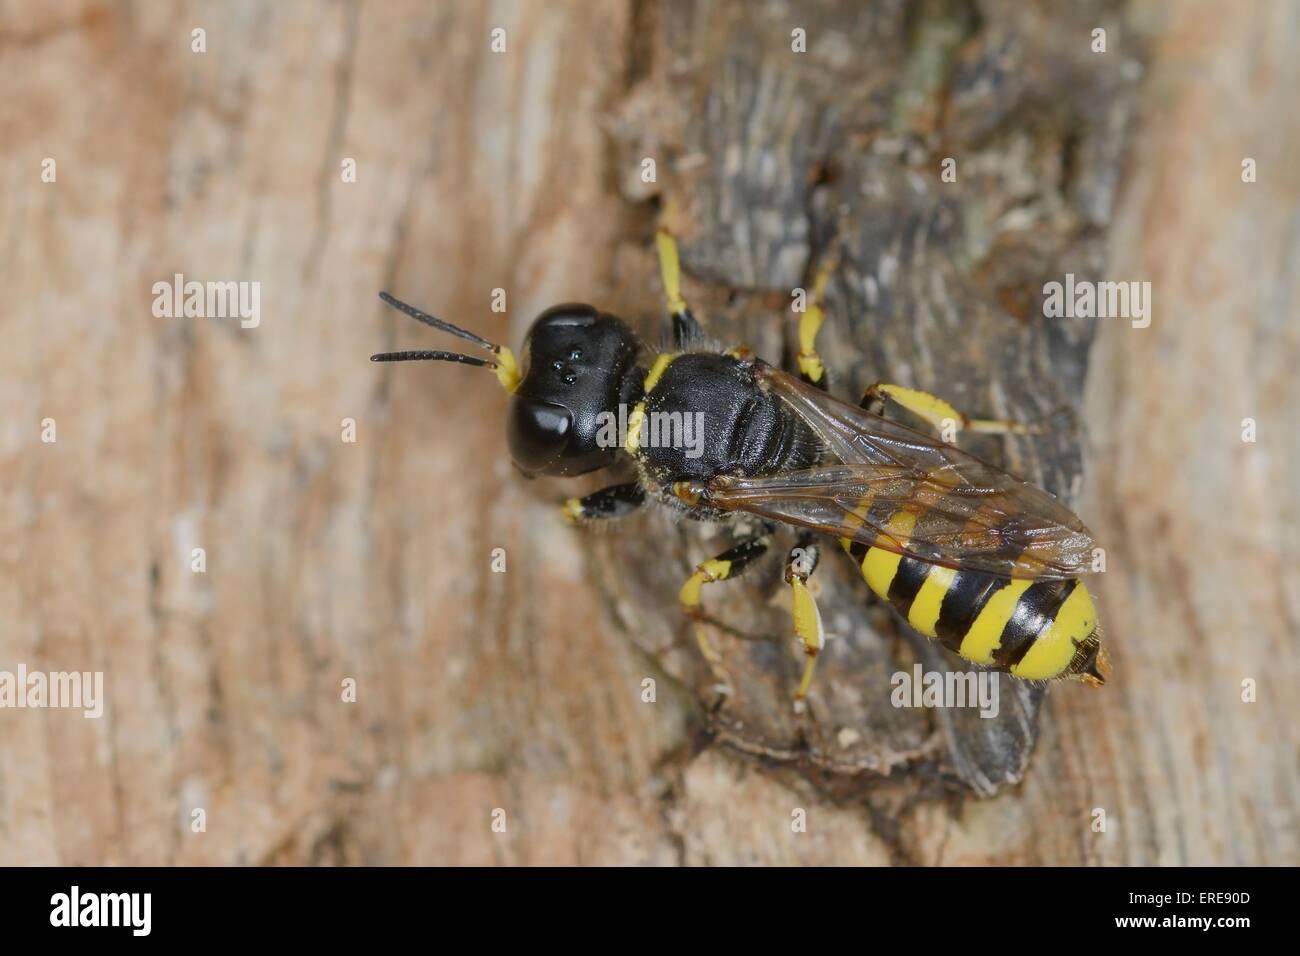 Digger wasp / Sphecid wasp (Ectemnius cephalotes) returning to a nest burrow it has excavated in the dead wood of an oak tree. Stock Photo